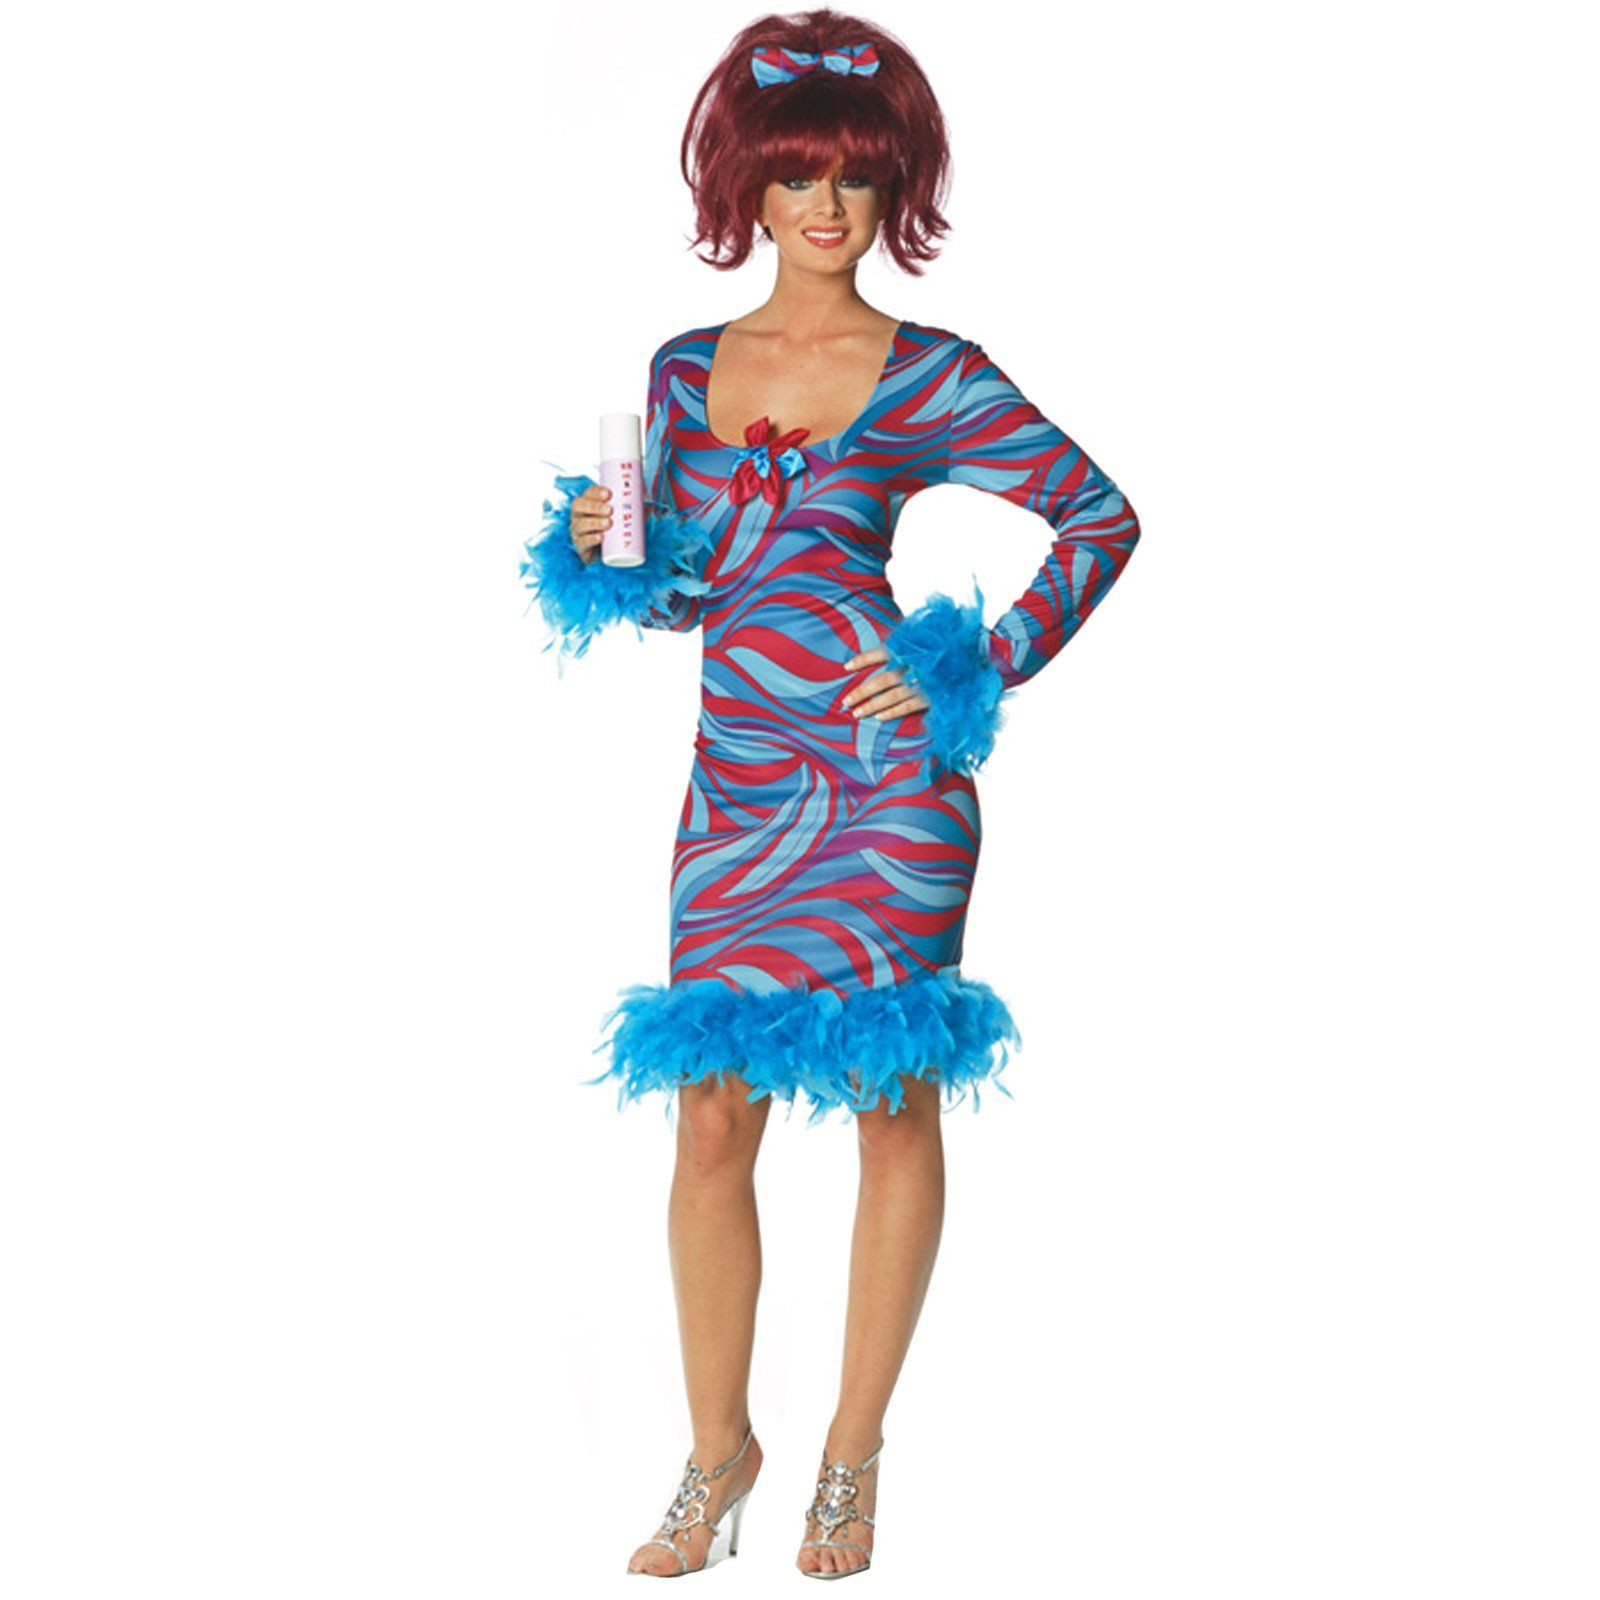 70S Dress Up Ideas For Kids
 Pin on 60 s themed parties